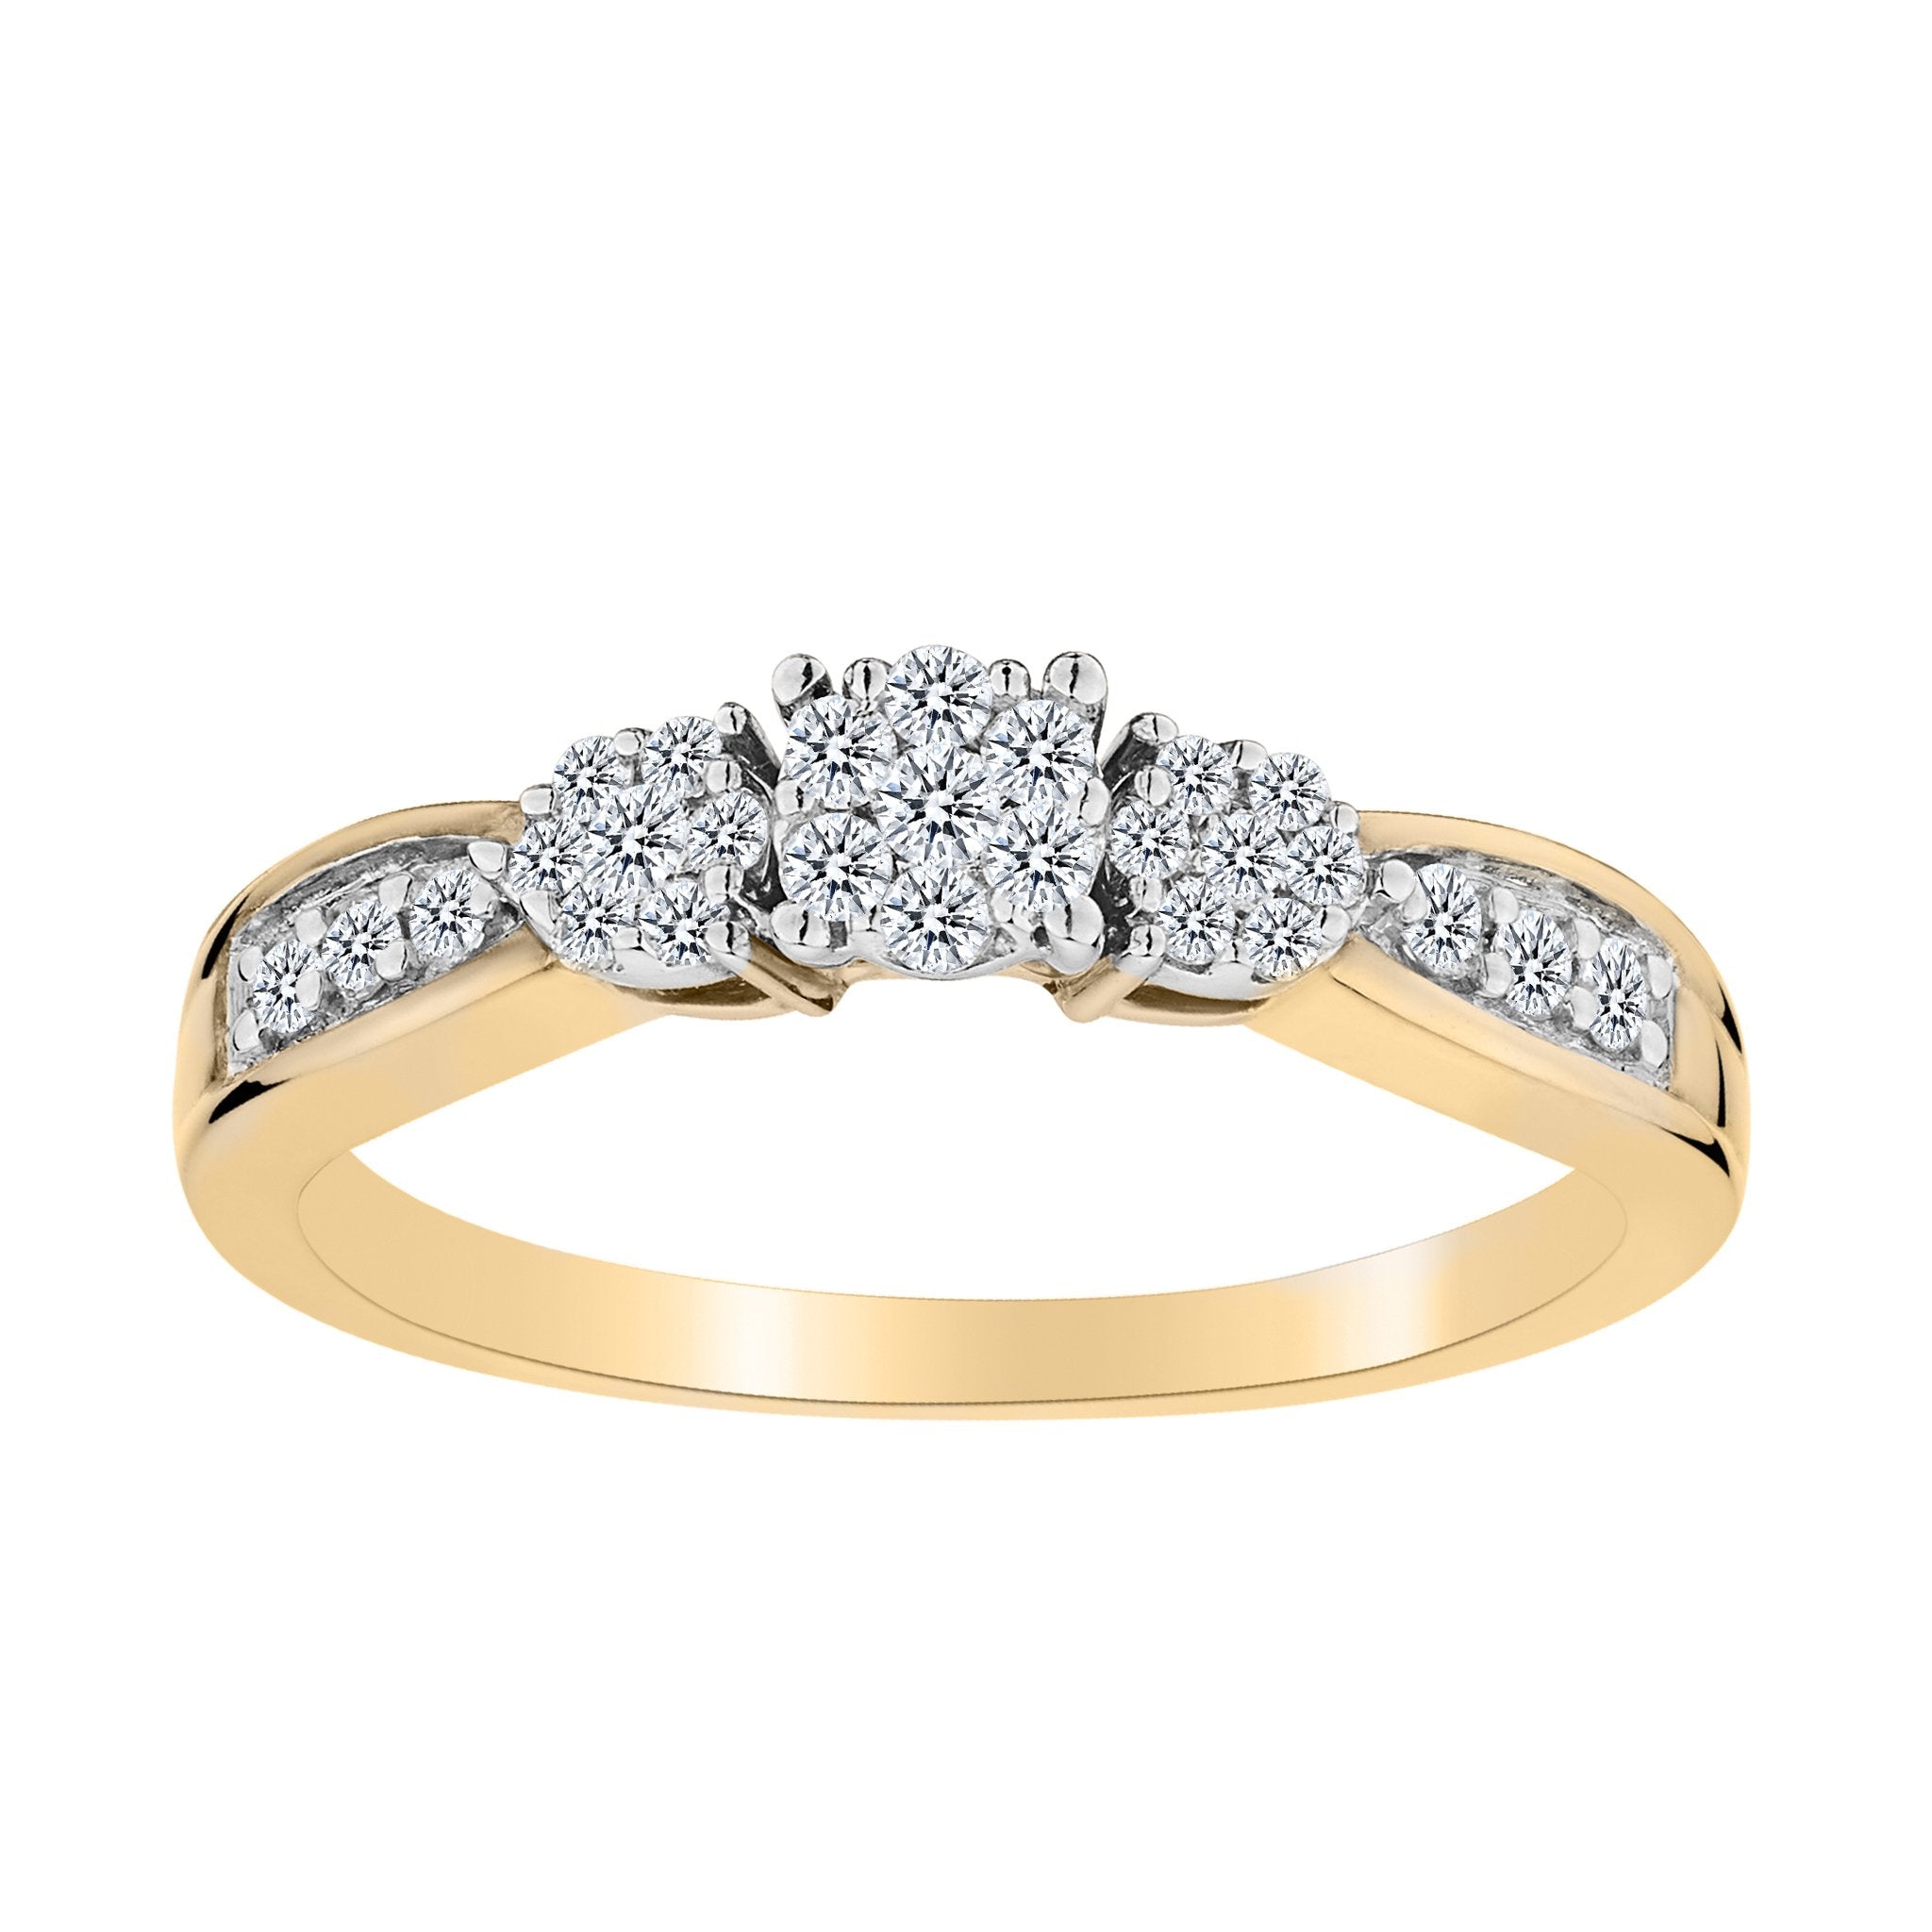 .33 Carat of Diamonds "Past, Present, Future" Ring, 10kt Yellow Gold.....................NOW